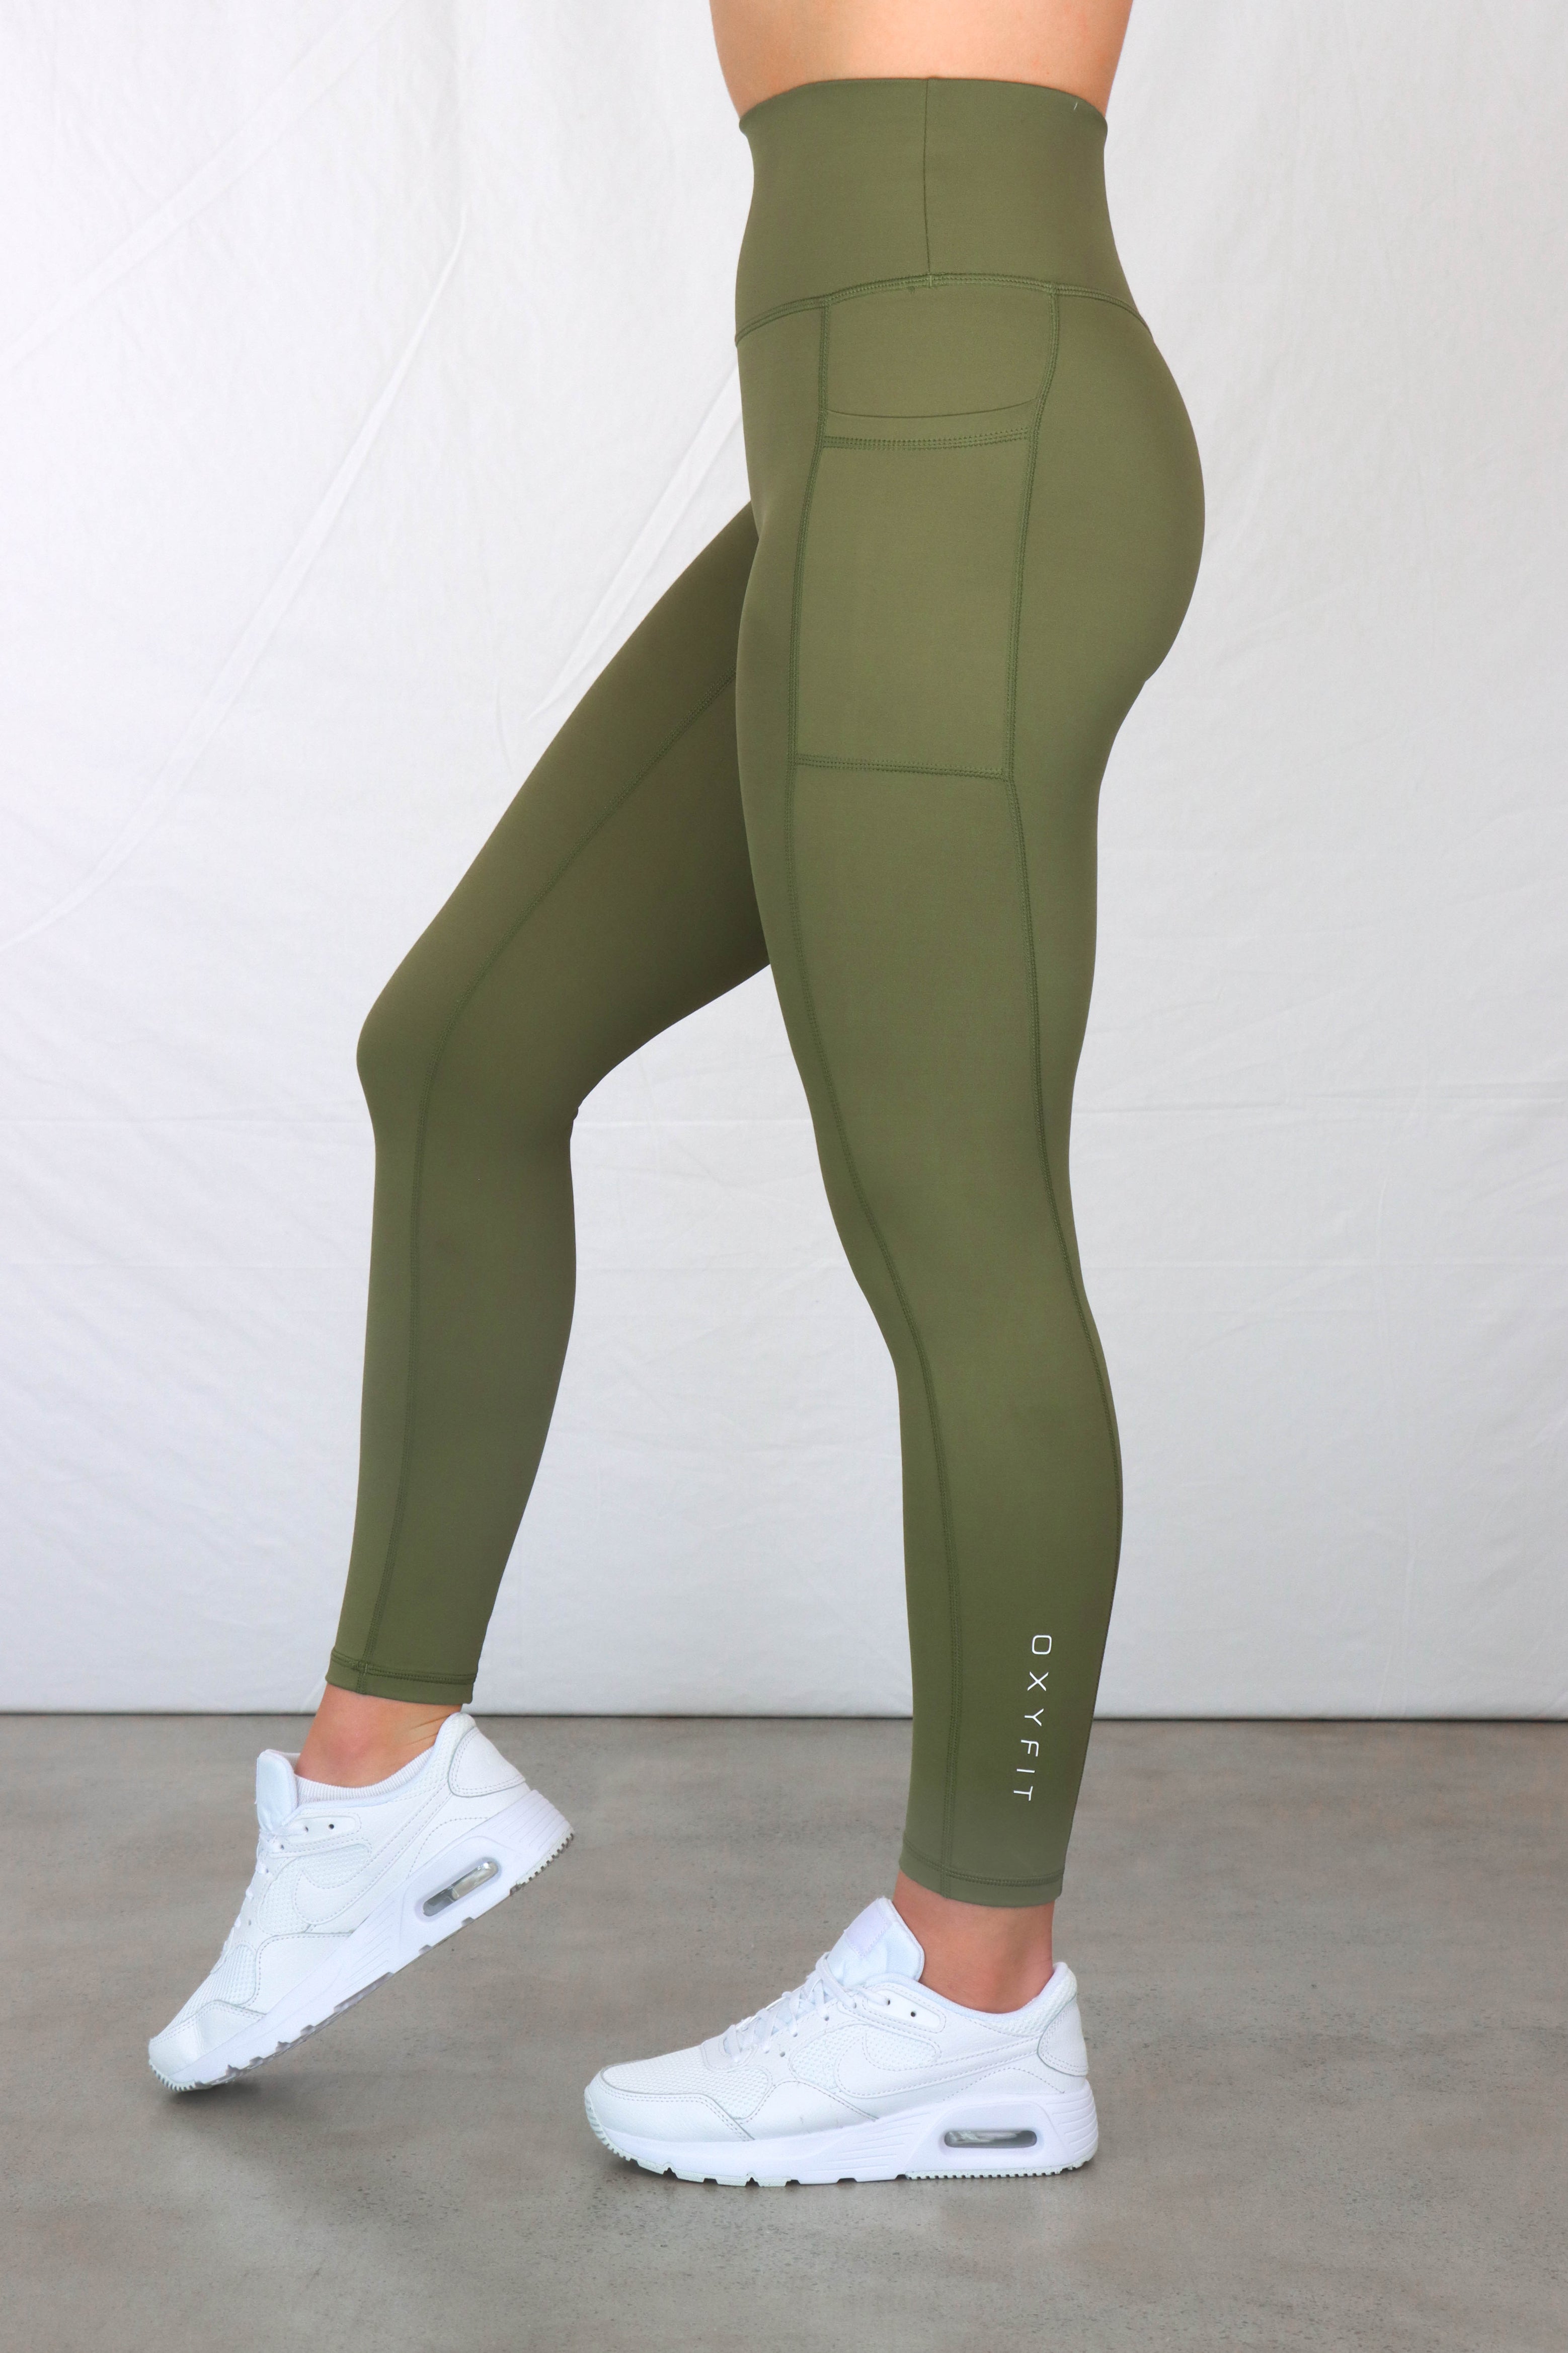 High Waist Compression Best Compression Yoga Pants For Women Candy Colored  Black Patchwork Fitness Leggings For Running, Dancing, And Skinny Trousers  From Gemma_yong, $7.39